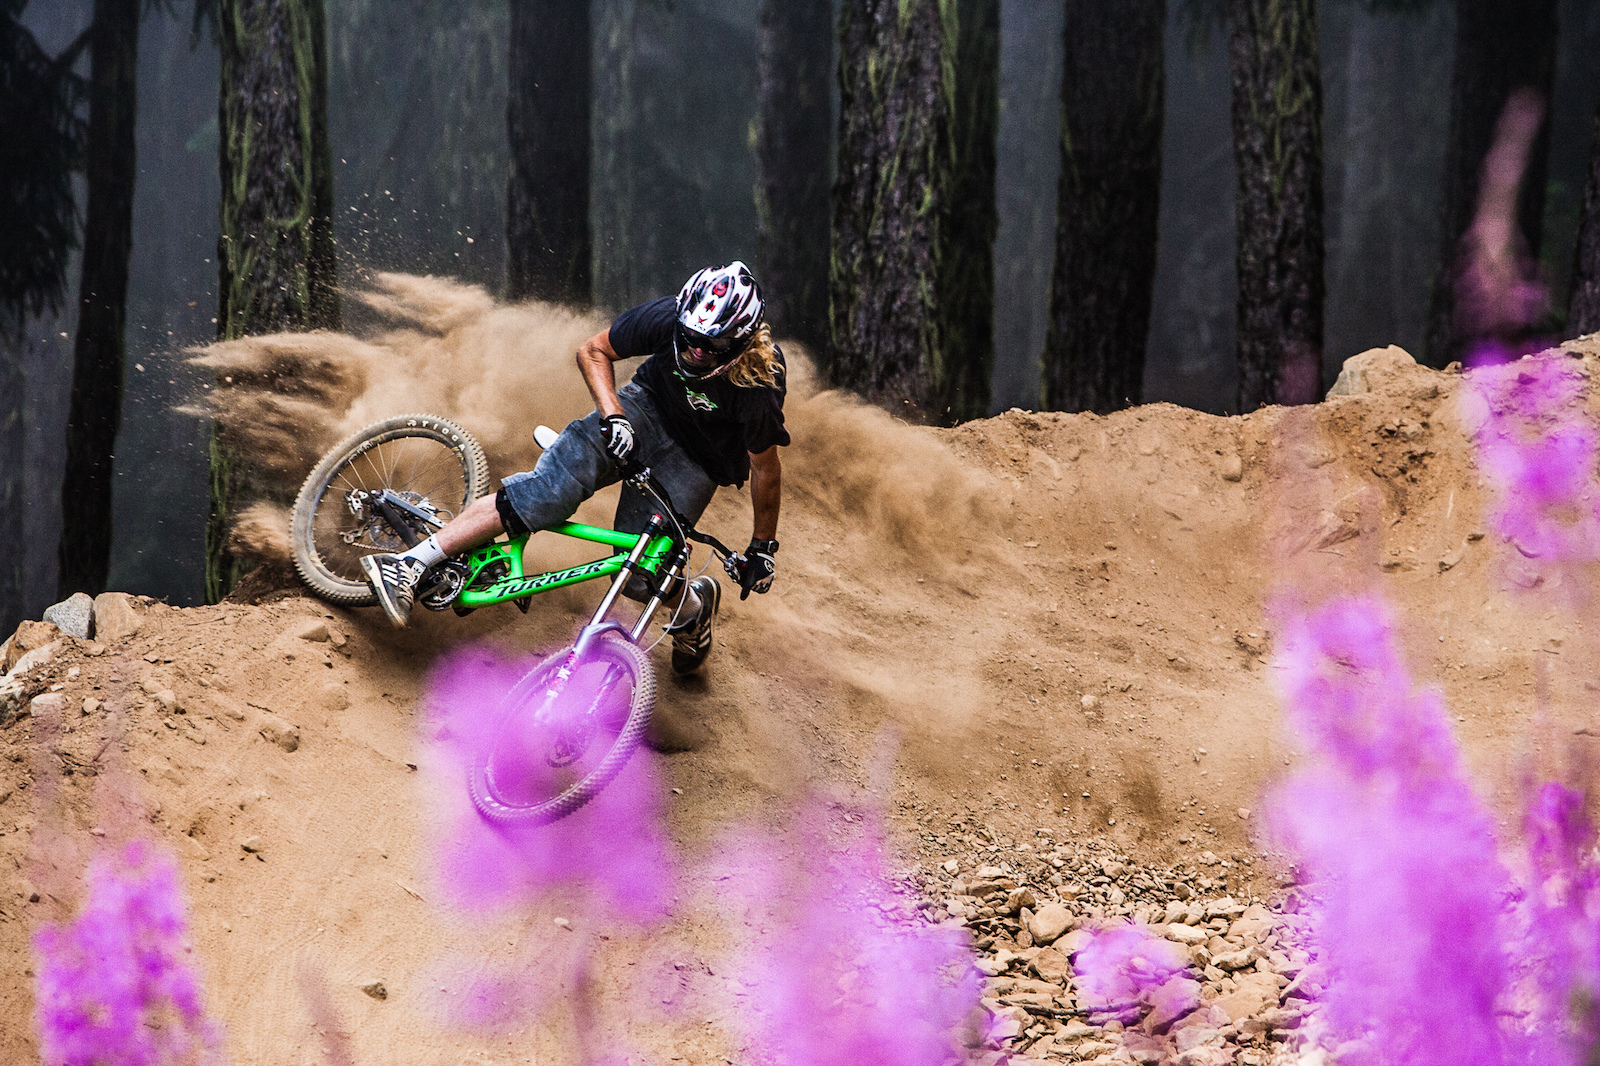 Kelly McGarry creates a dust cloud by aggressively cornering his mountain bike in Whistler Bike Park Whistler BC Photo Dan Barham